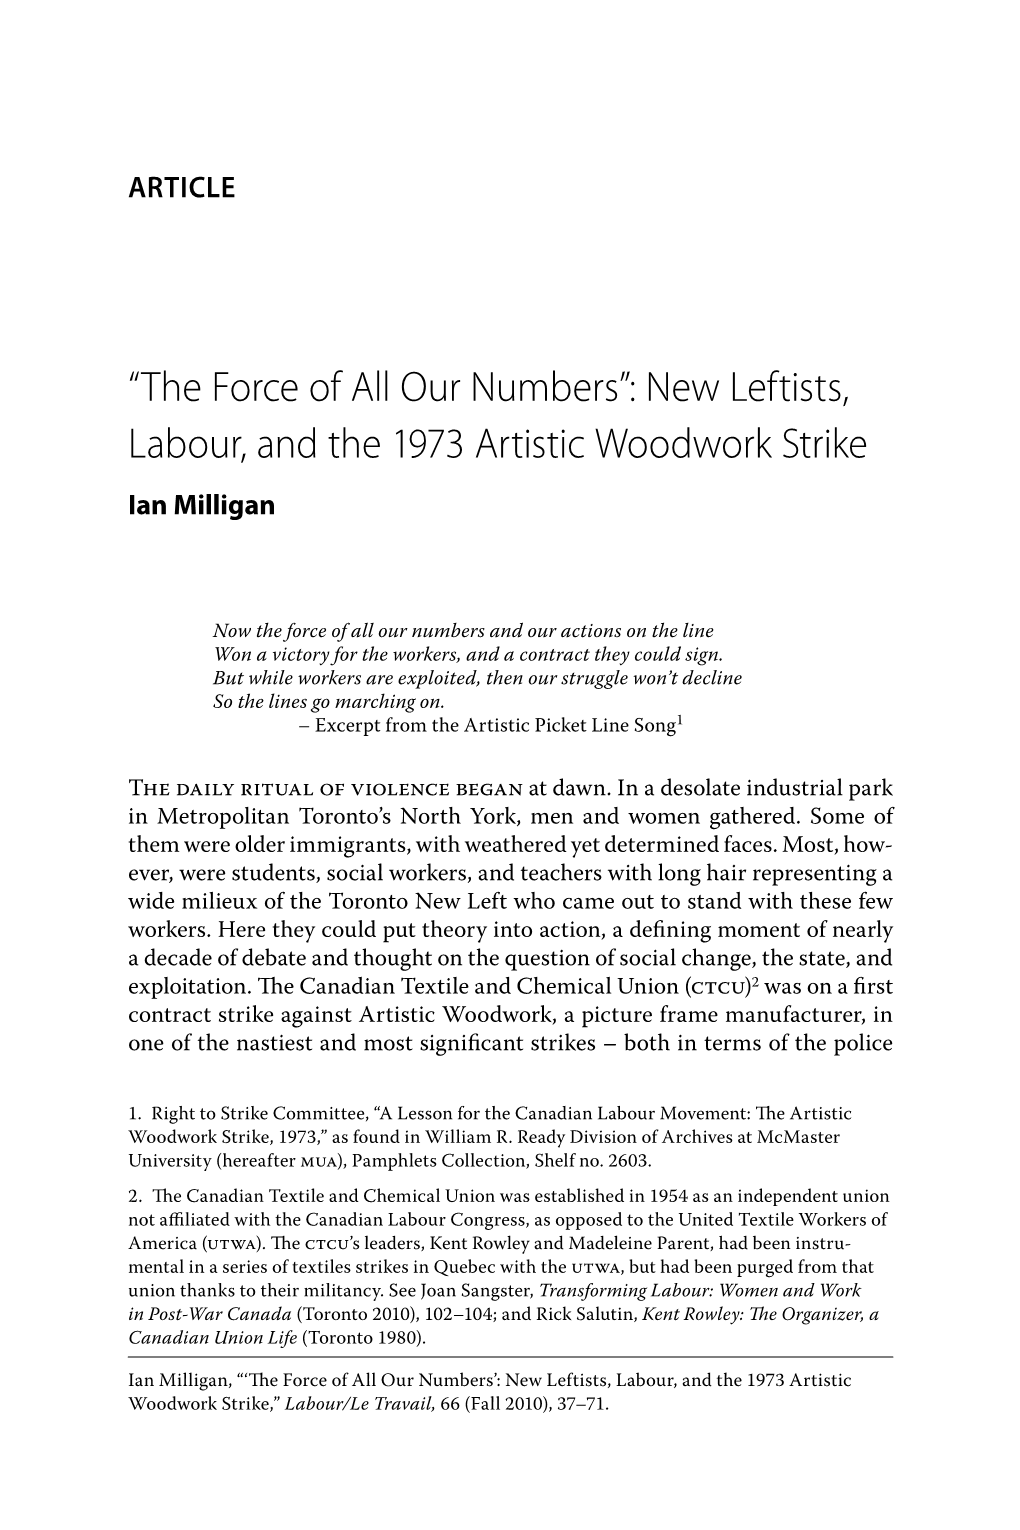 New Leftists, Labour, and the 1973 Artistic Woodwork Strike Ian Milligan